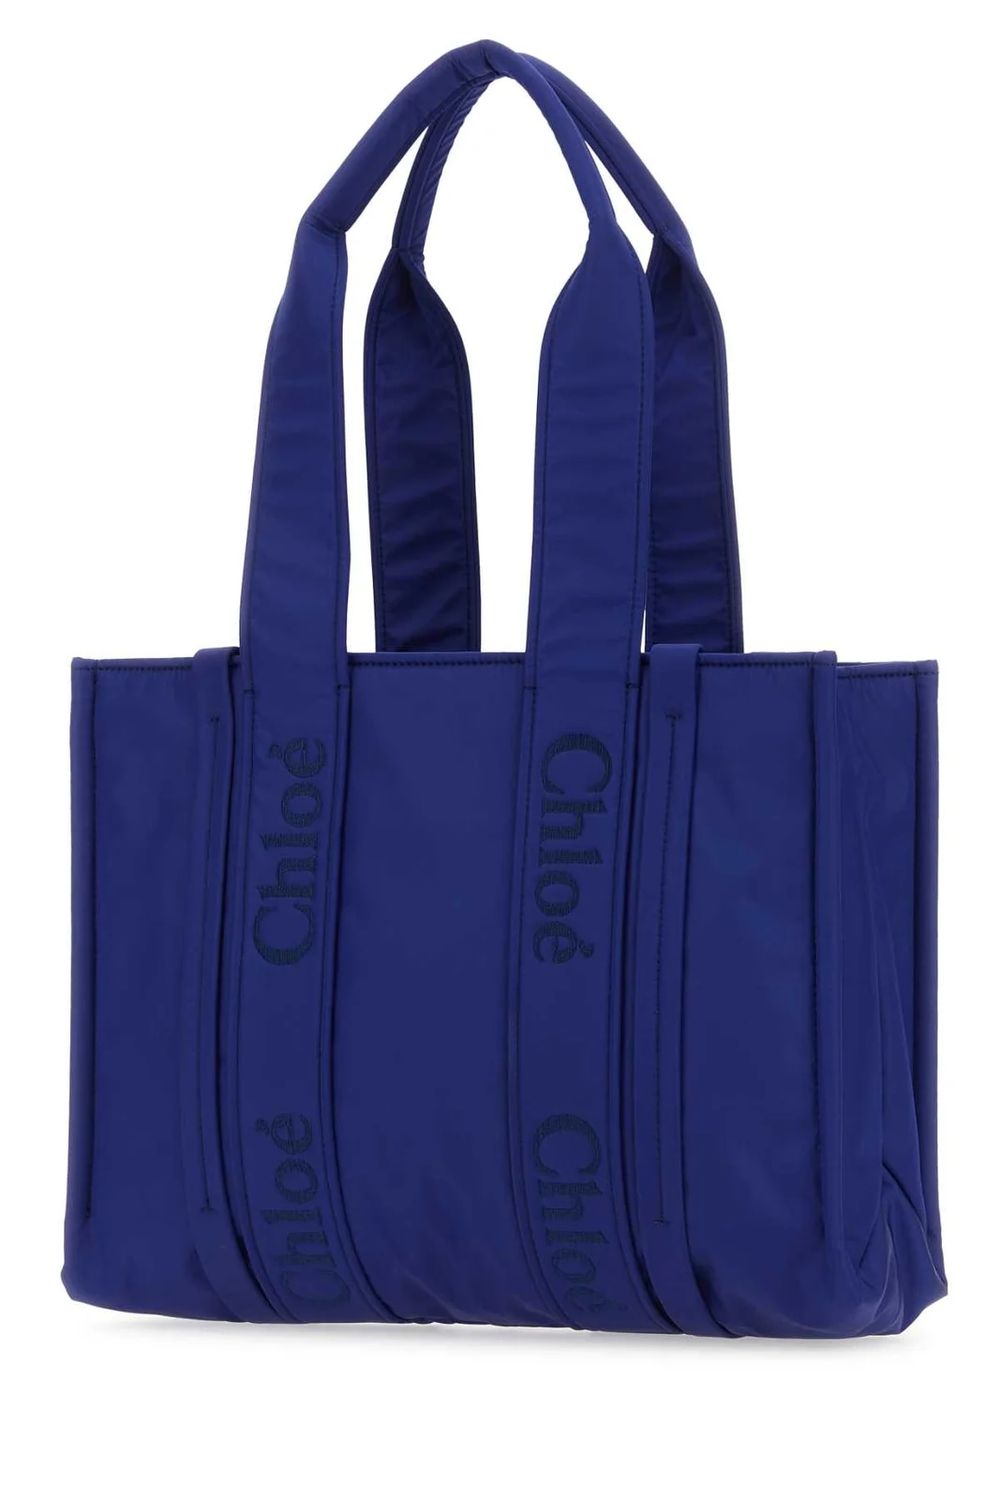 CHLOÉ Navy Blue Woody Medium Tote for Women with 100% Polyester